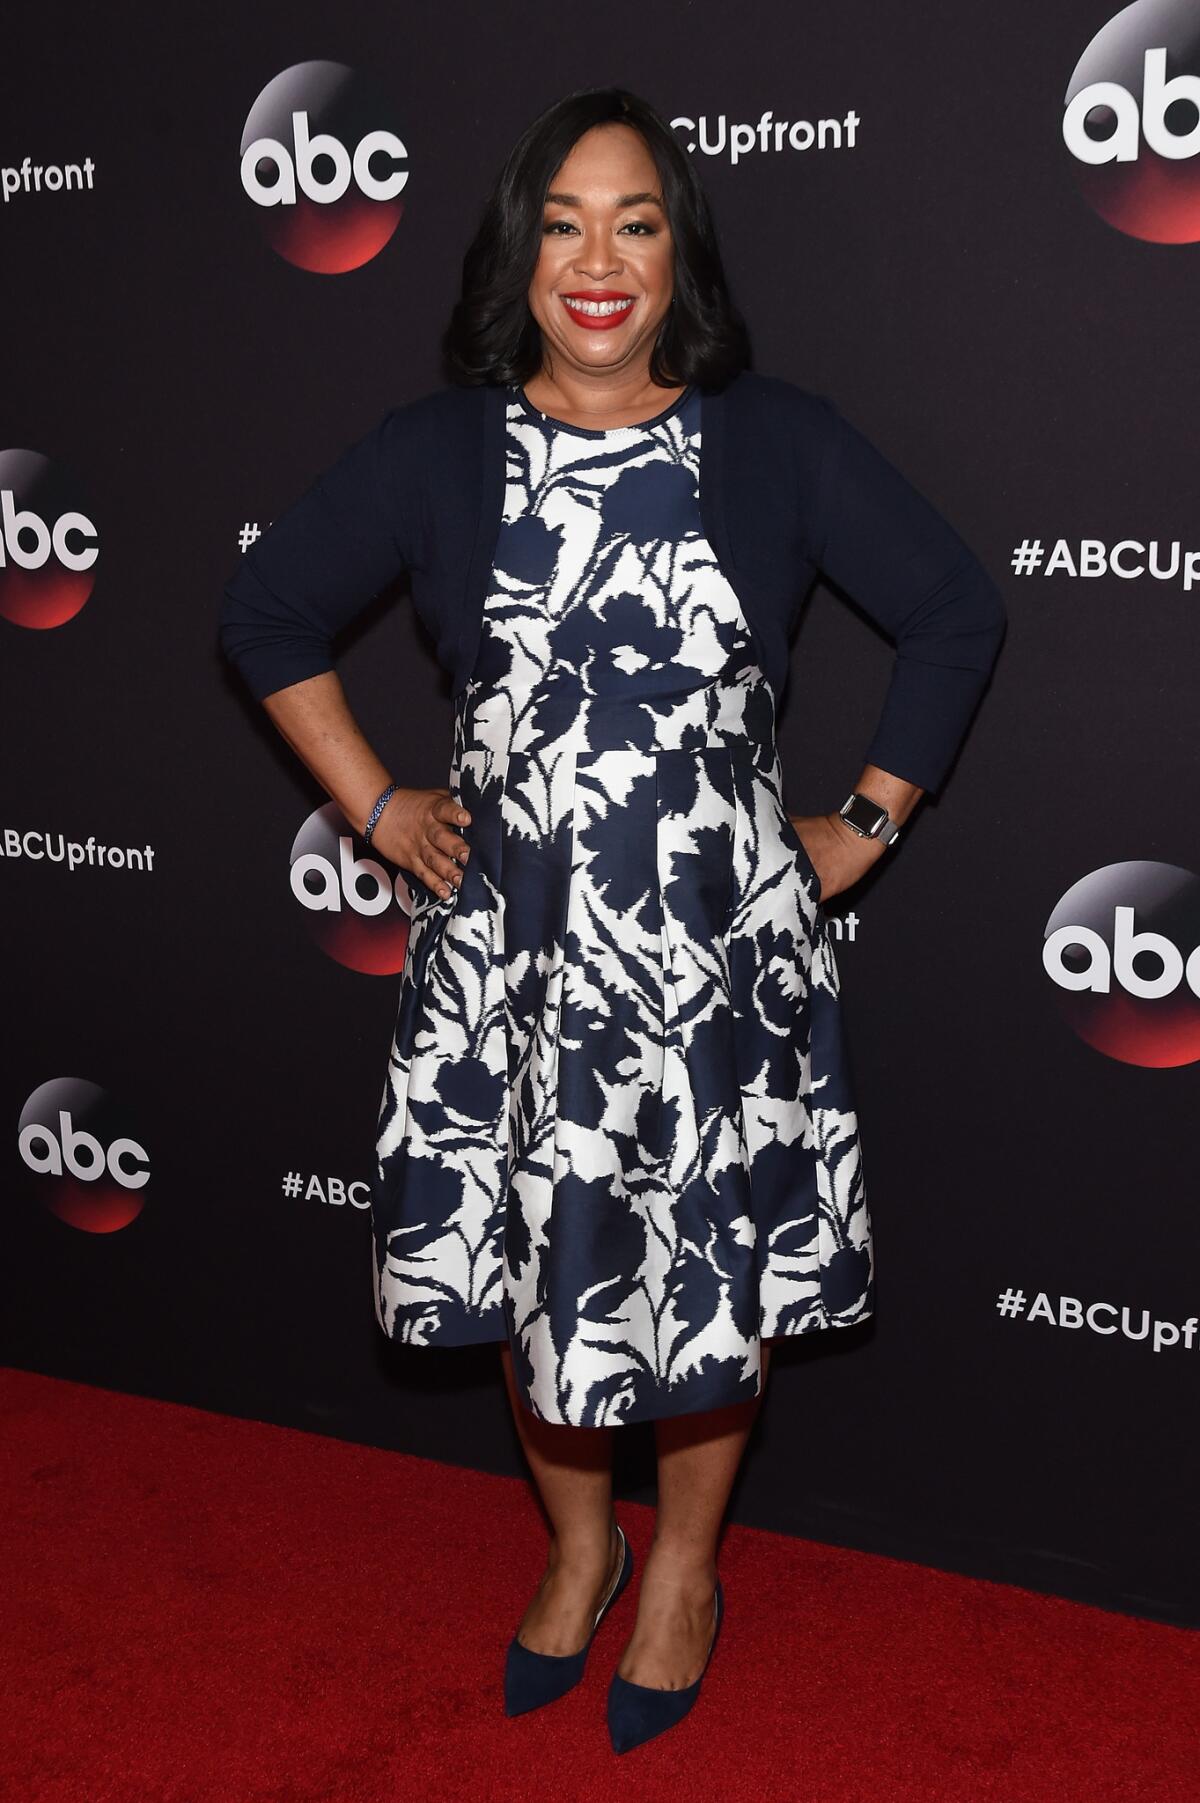 Shonda Rhimes attends the ABC upfront presentation at Avery Fisher Hall at New York's Lincoln Center.